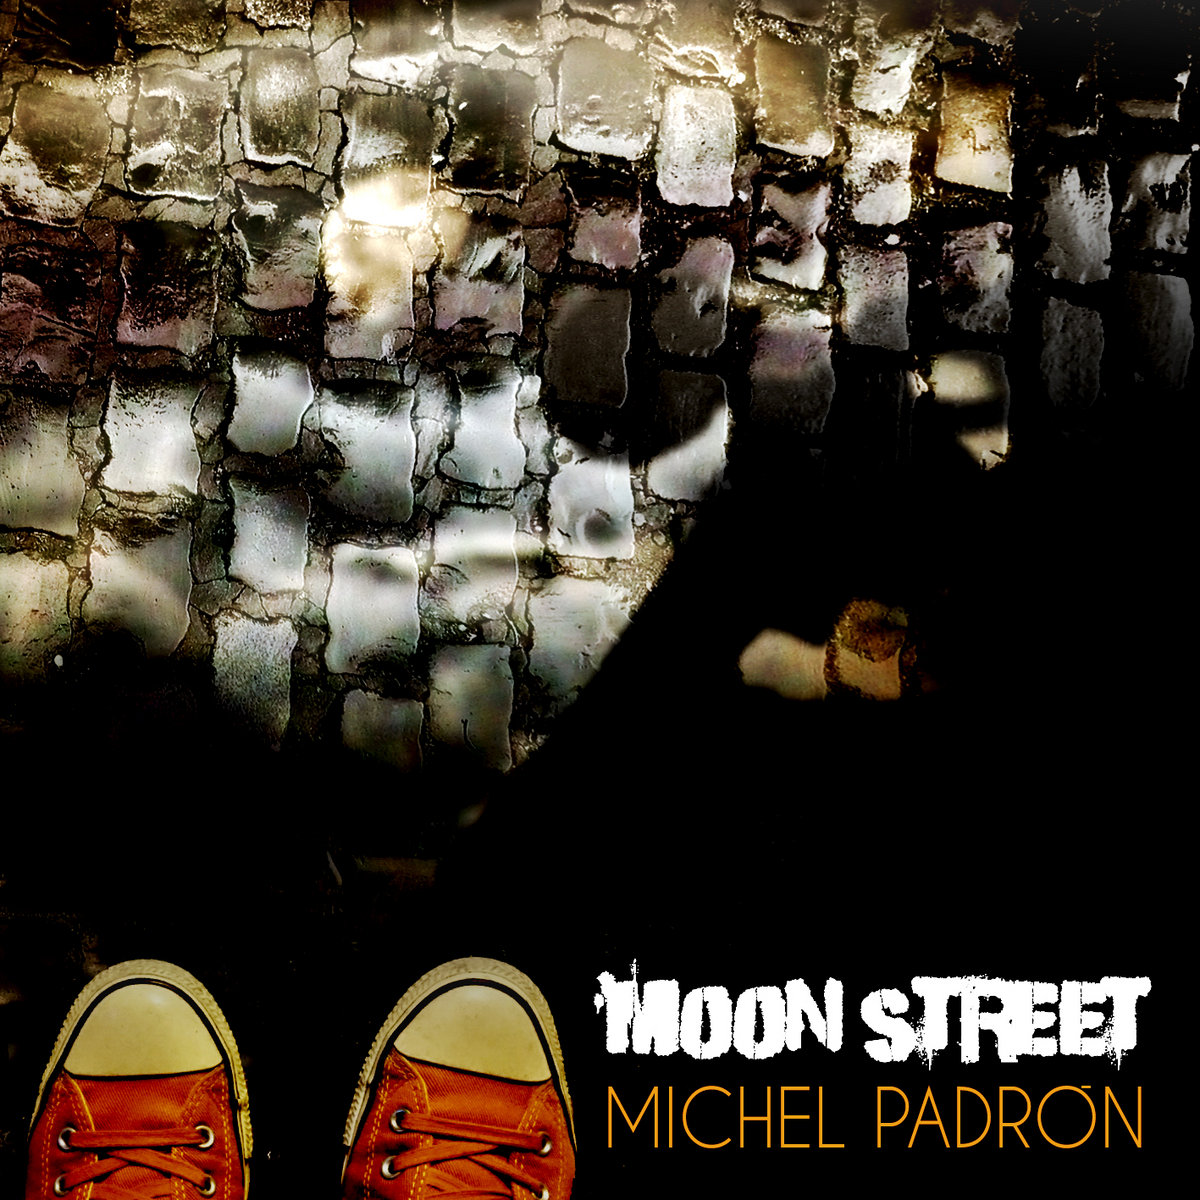 MOON STREET by MICHEL PADRON